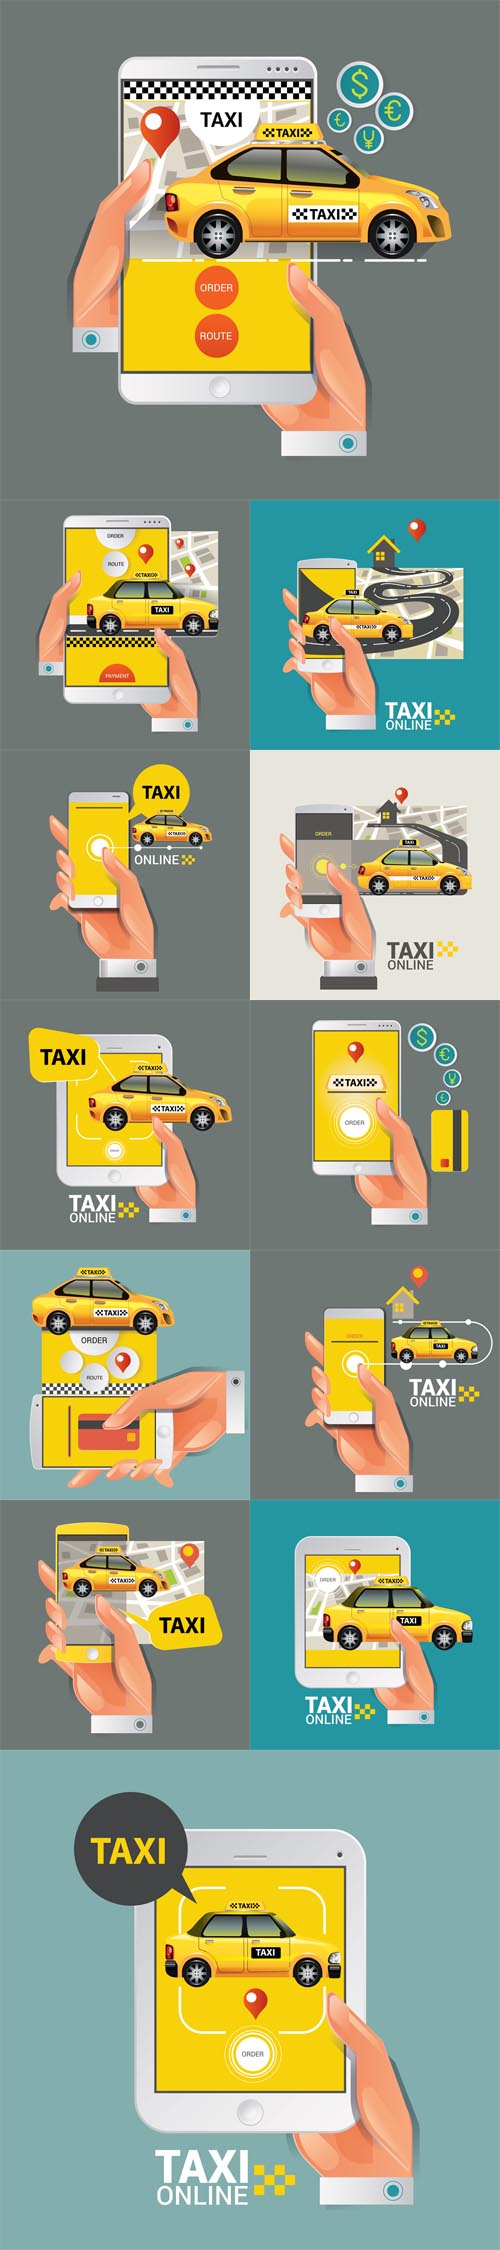 Vectors - Taxi on line. Taxi sign. Taxi service on smart phone